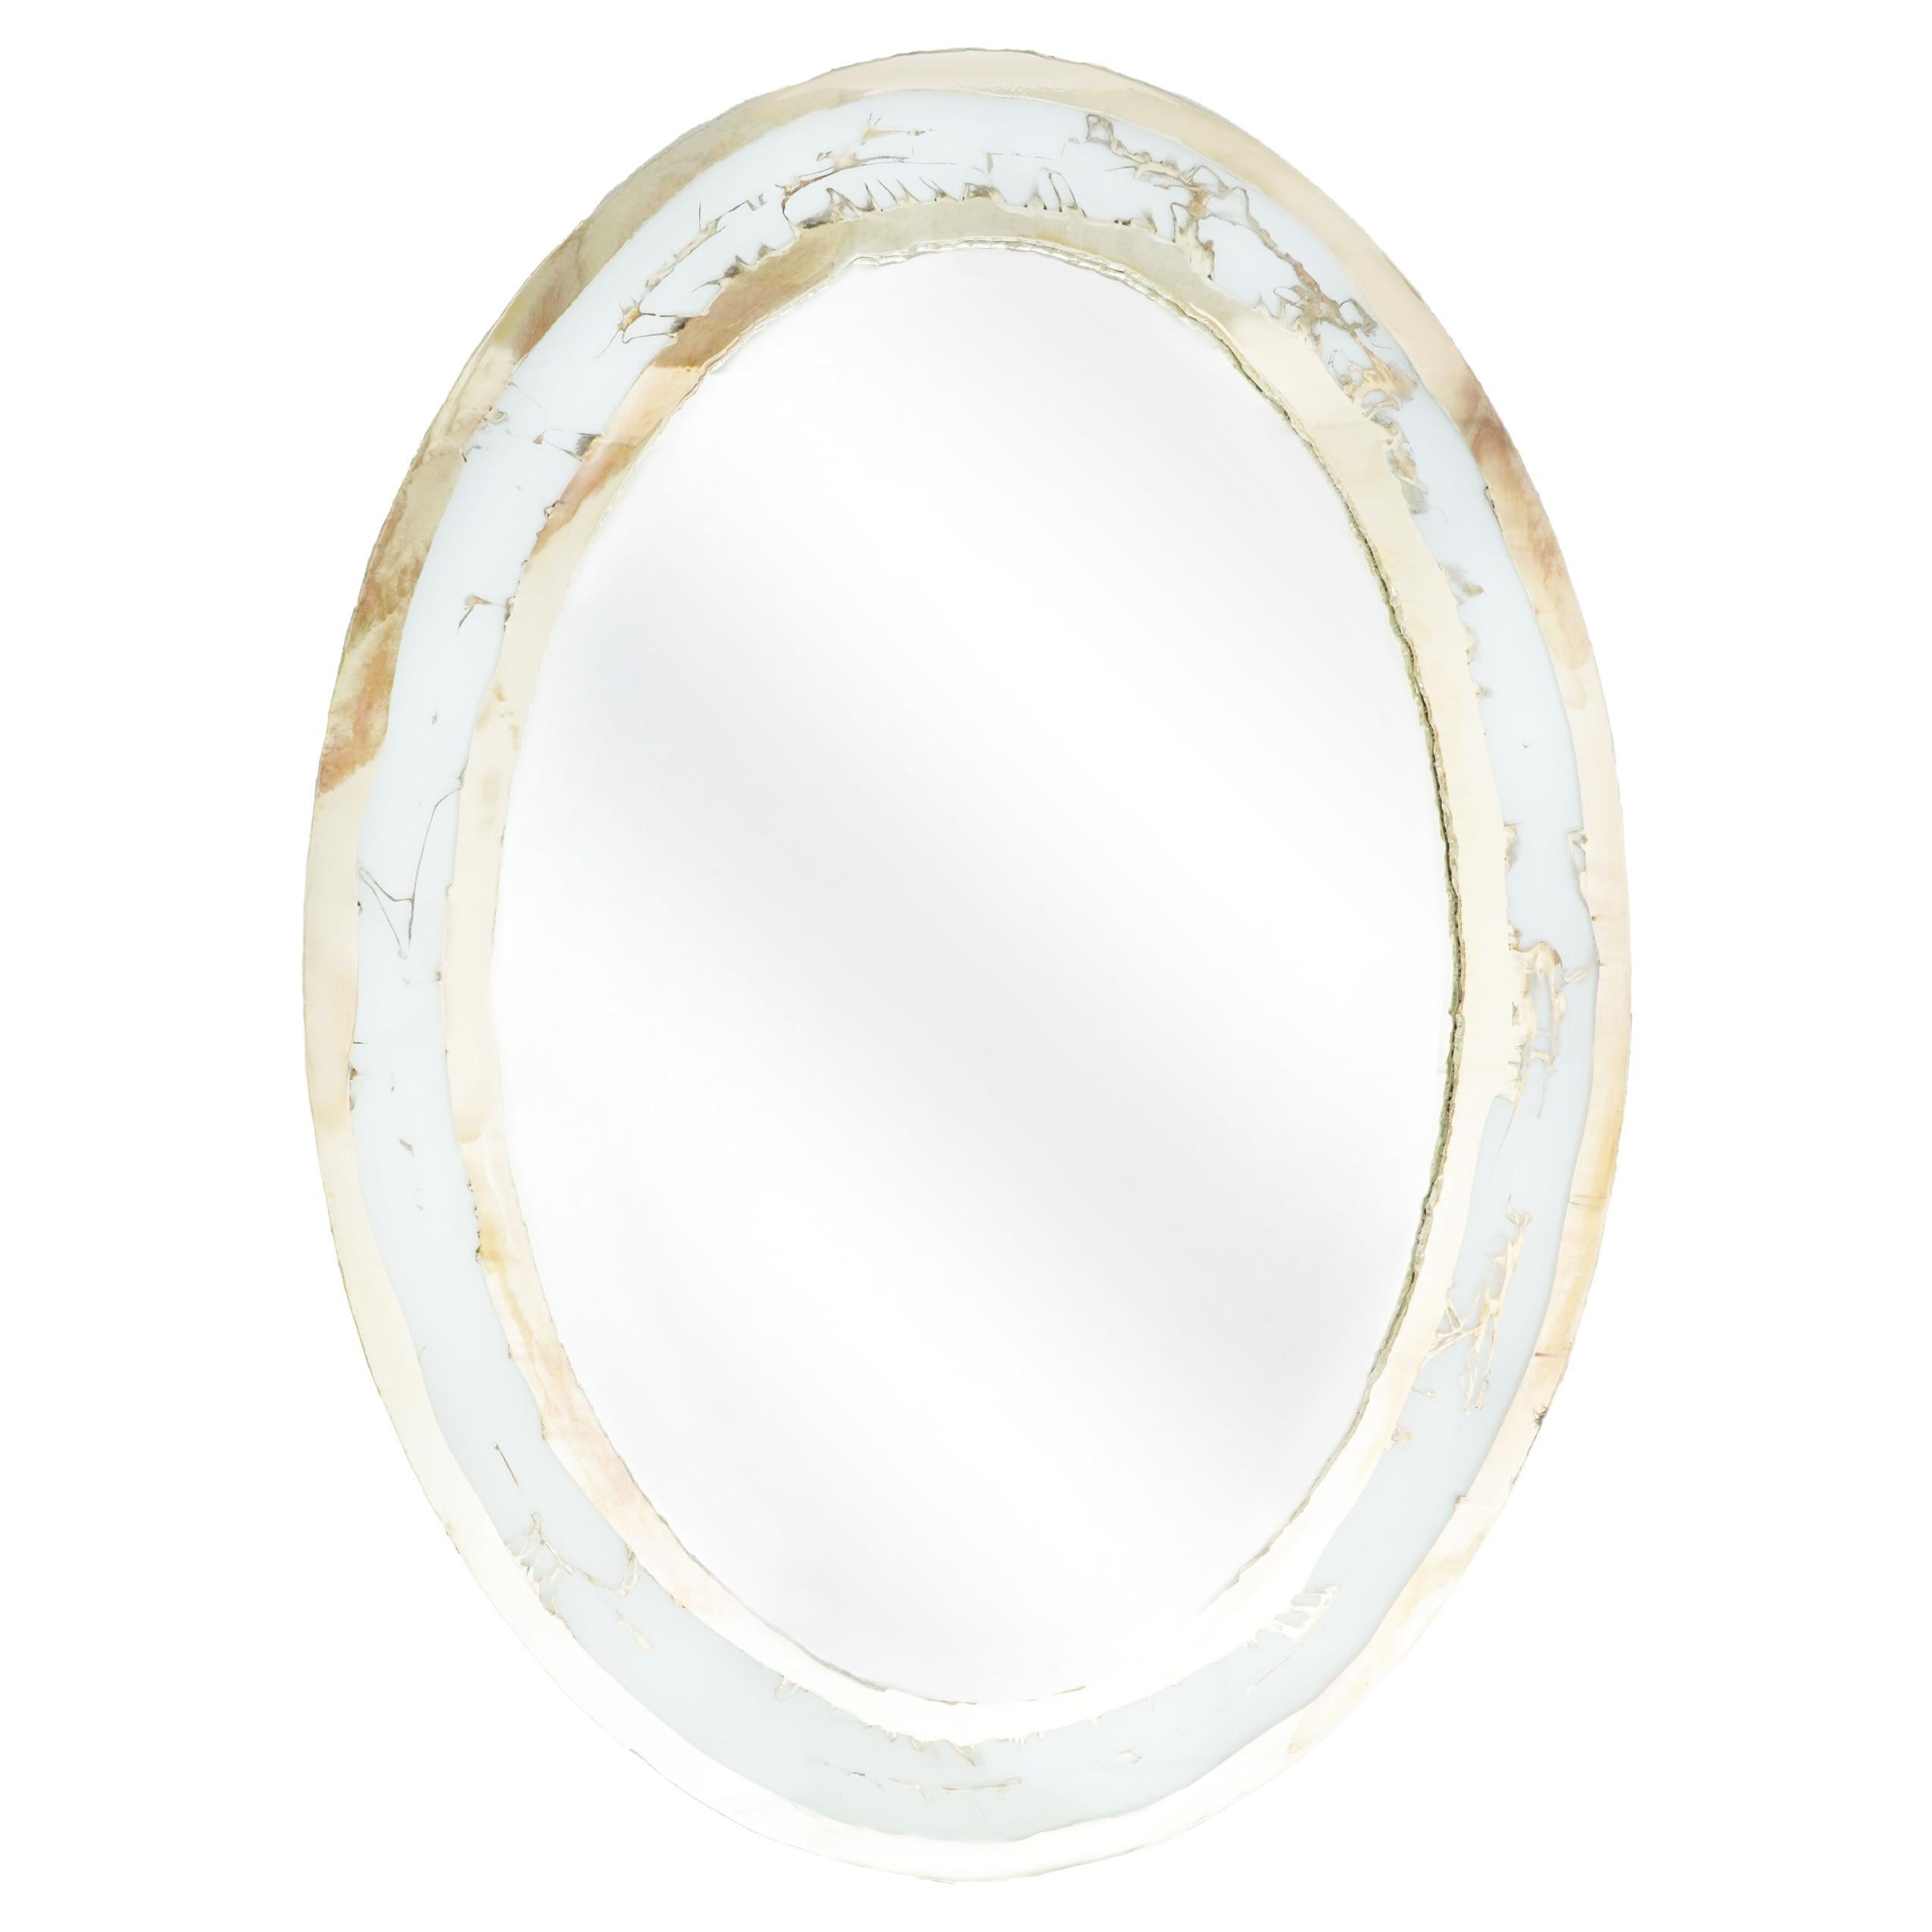 Birch Floor Mirrors and Full-Length Mirrors